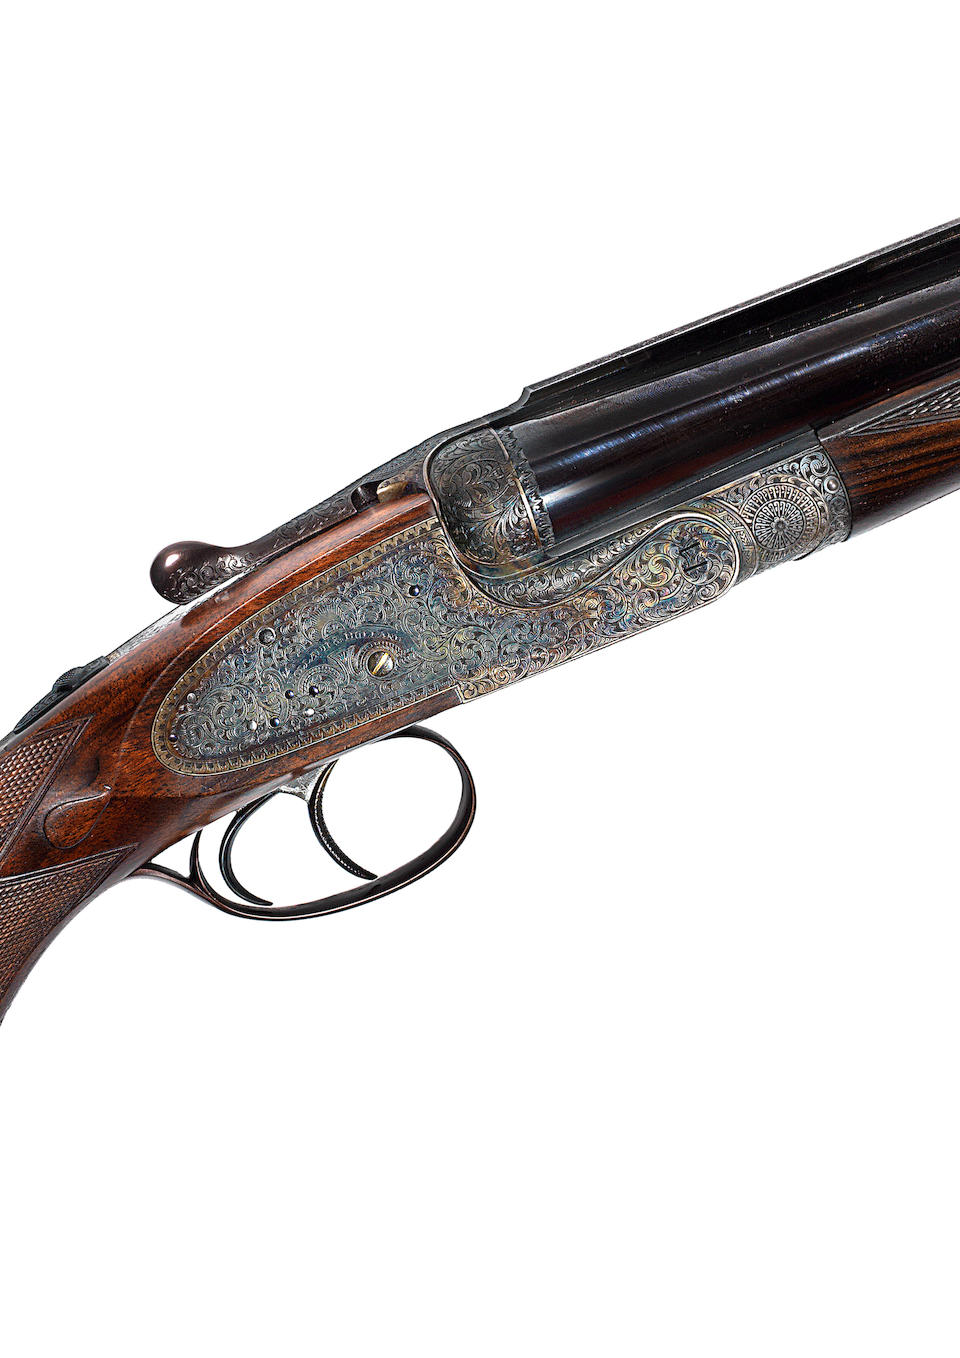 A very fine .375(H&H Magnum Flanged) 'Royal' sidelock ejector rifle by Holland & Holland, no. 35606  In its brass-mounted oak and leather case with canvas cover